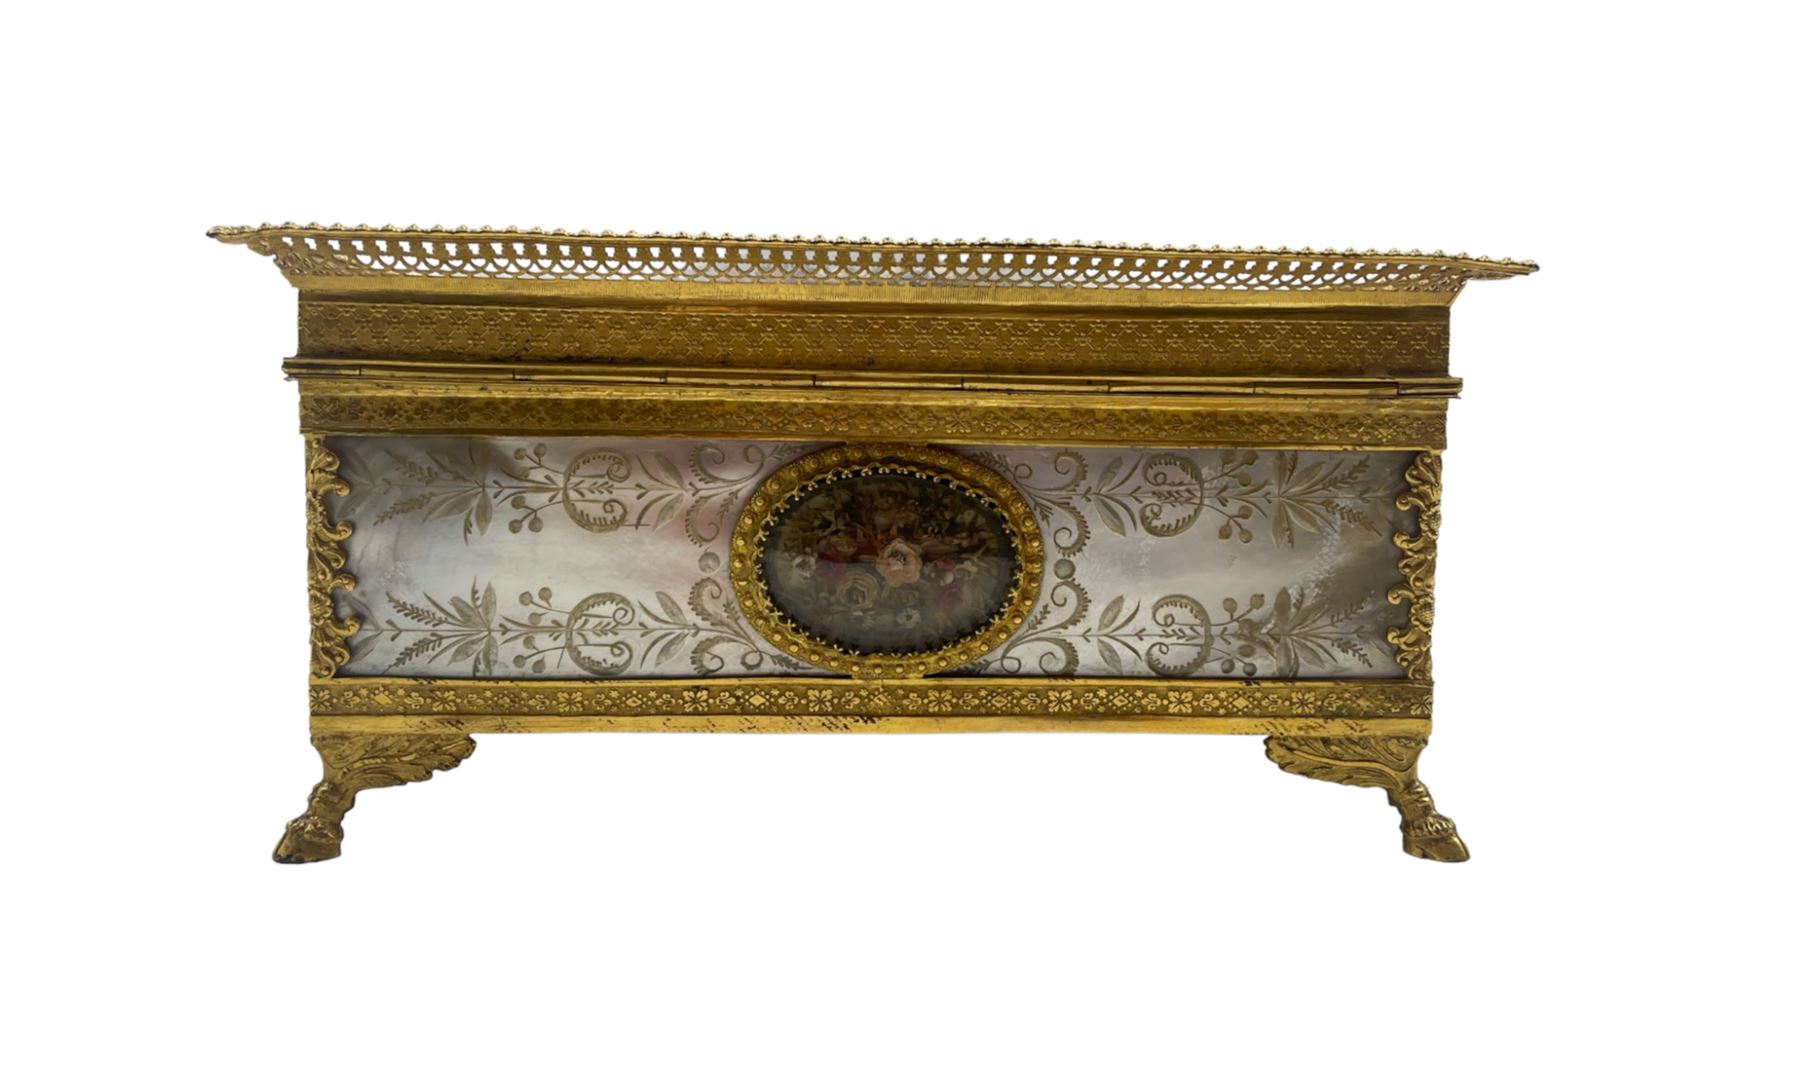 Early 19th century French Palais Royal type ormolu and mother-of-pearl musical sewing etui - Image 17 of 19